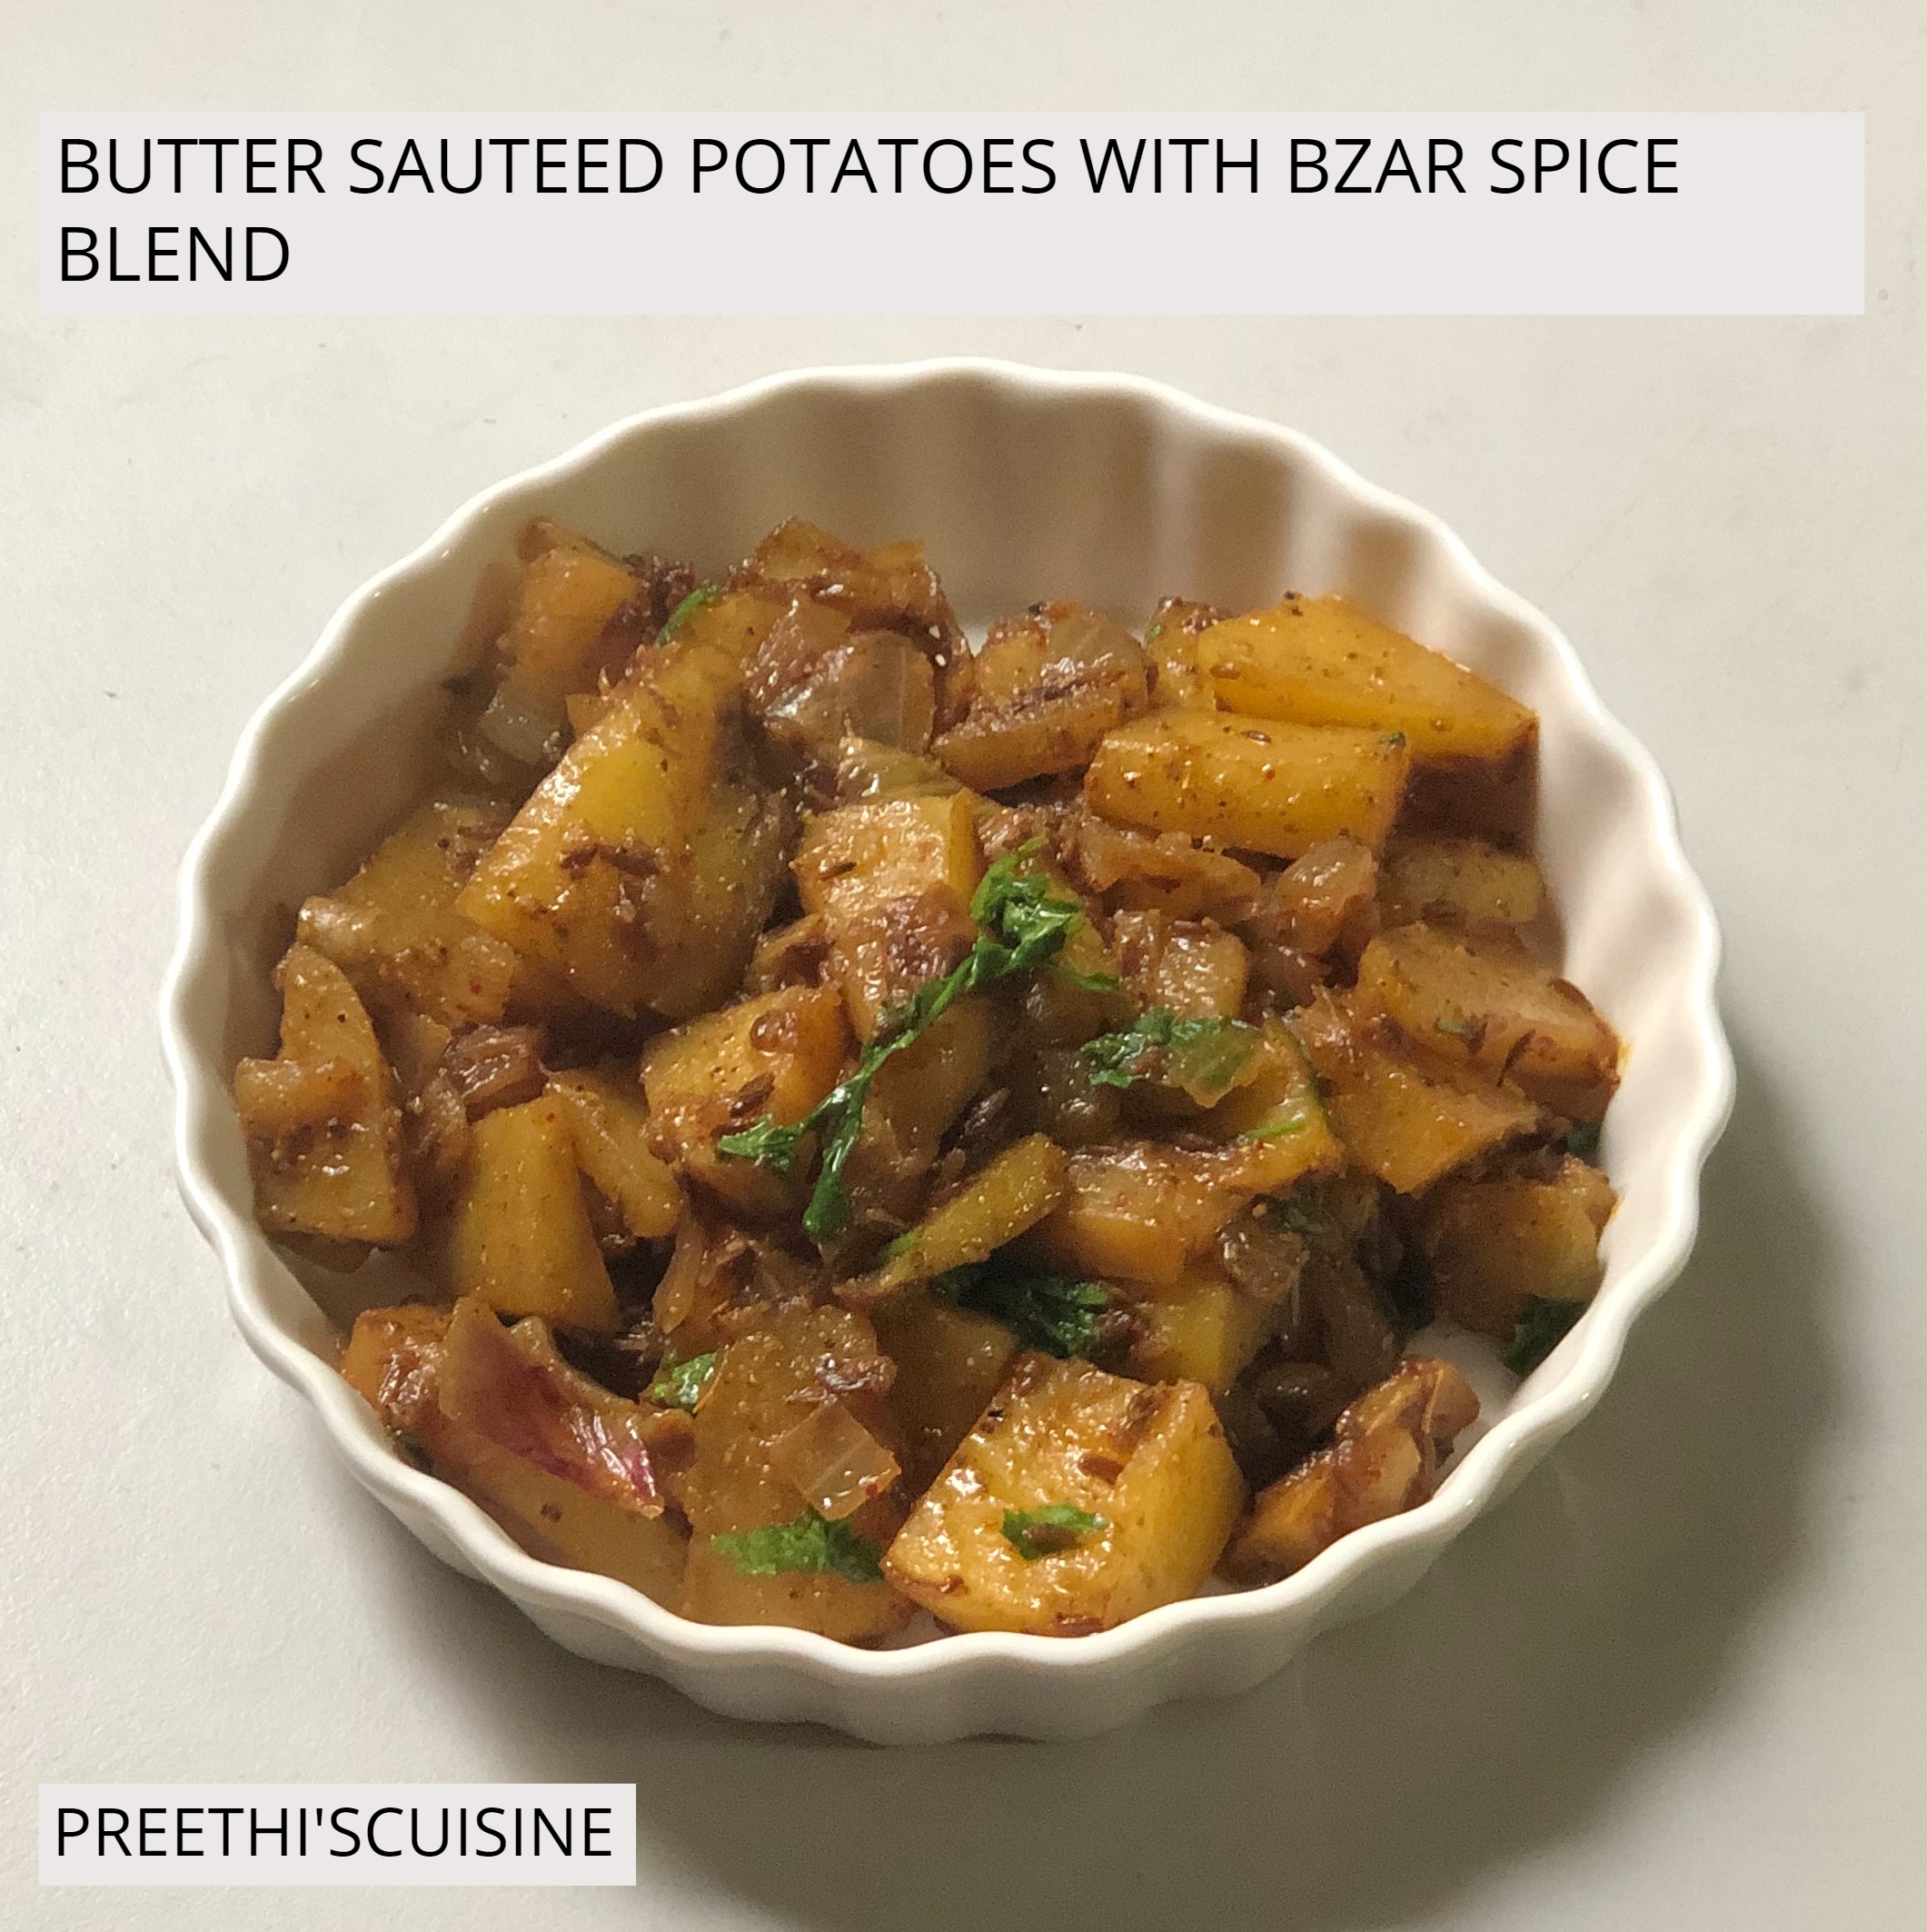 BUTTER SAUTEED POTATOES WITH BZAR SPICE BLEND